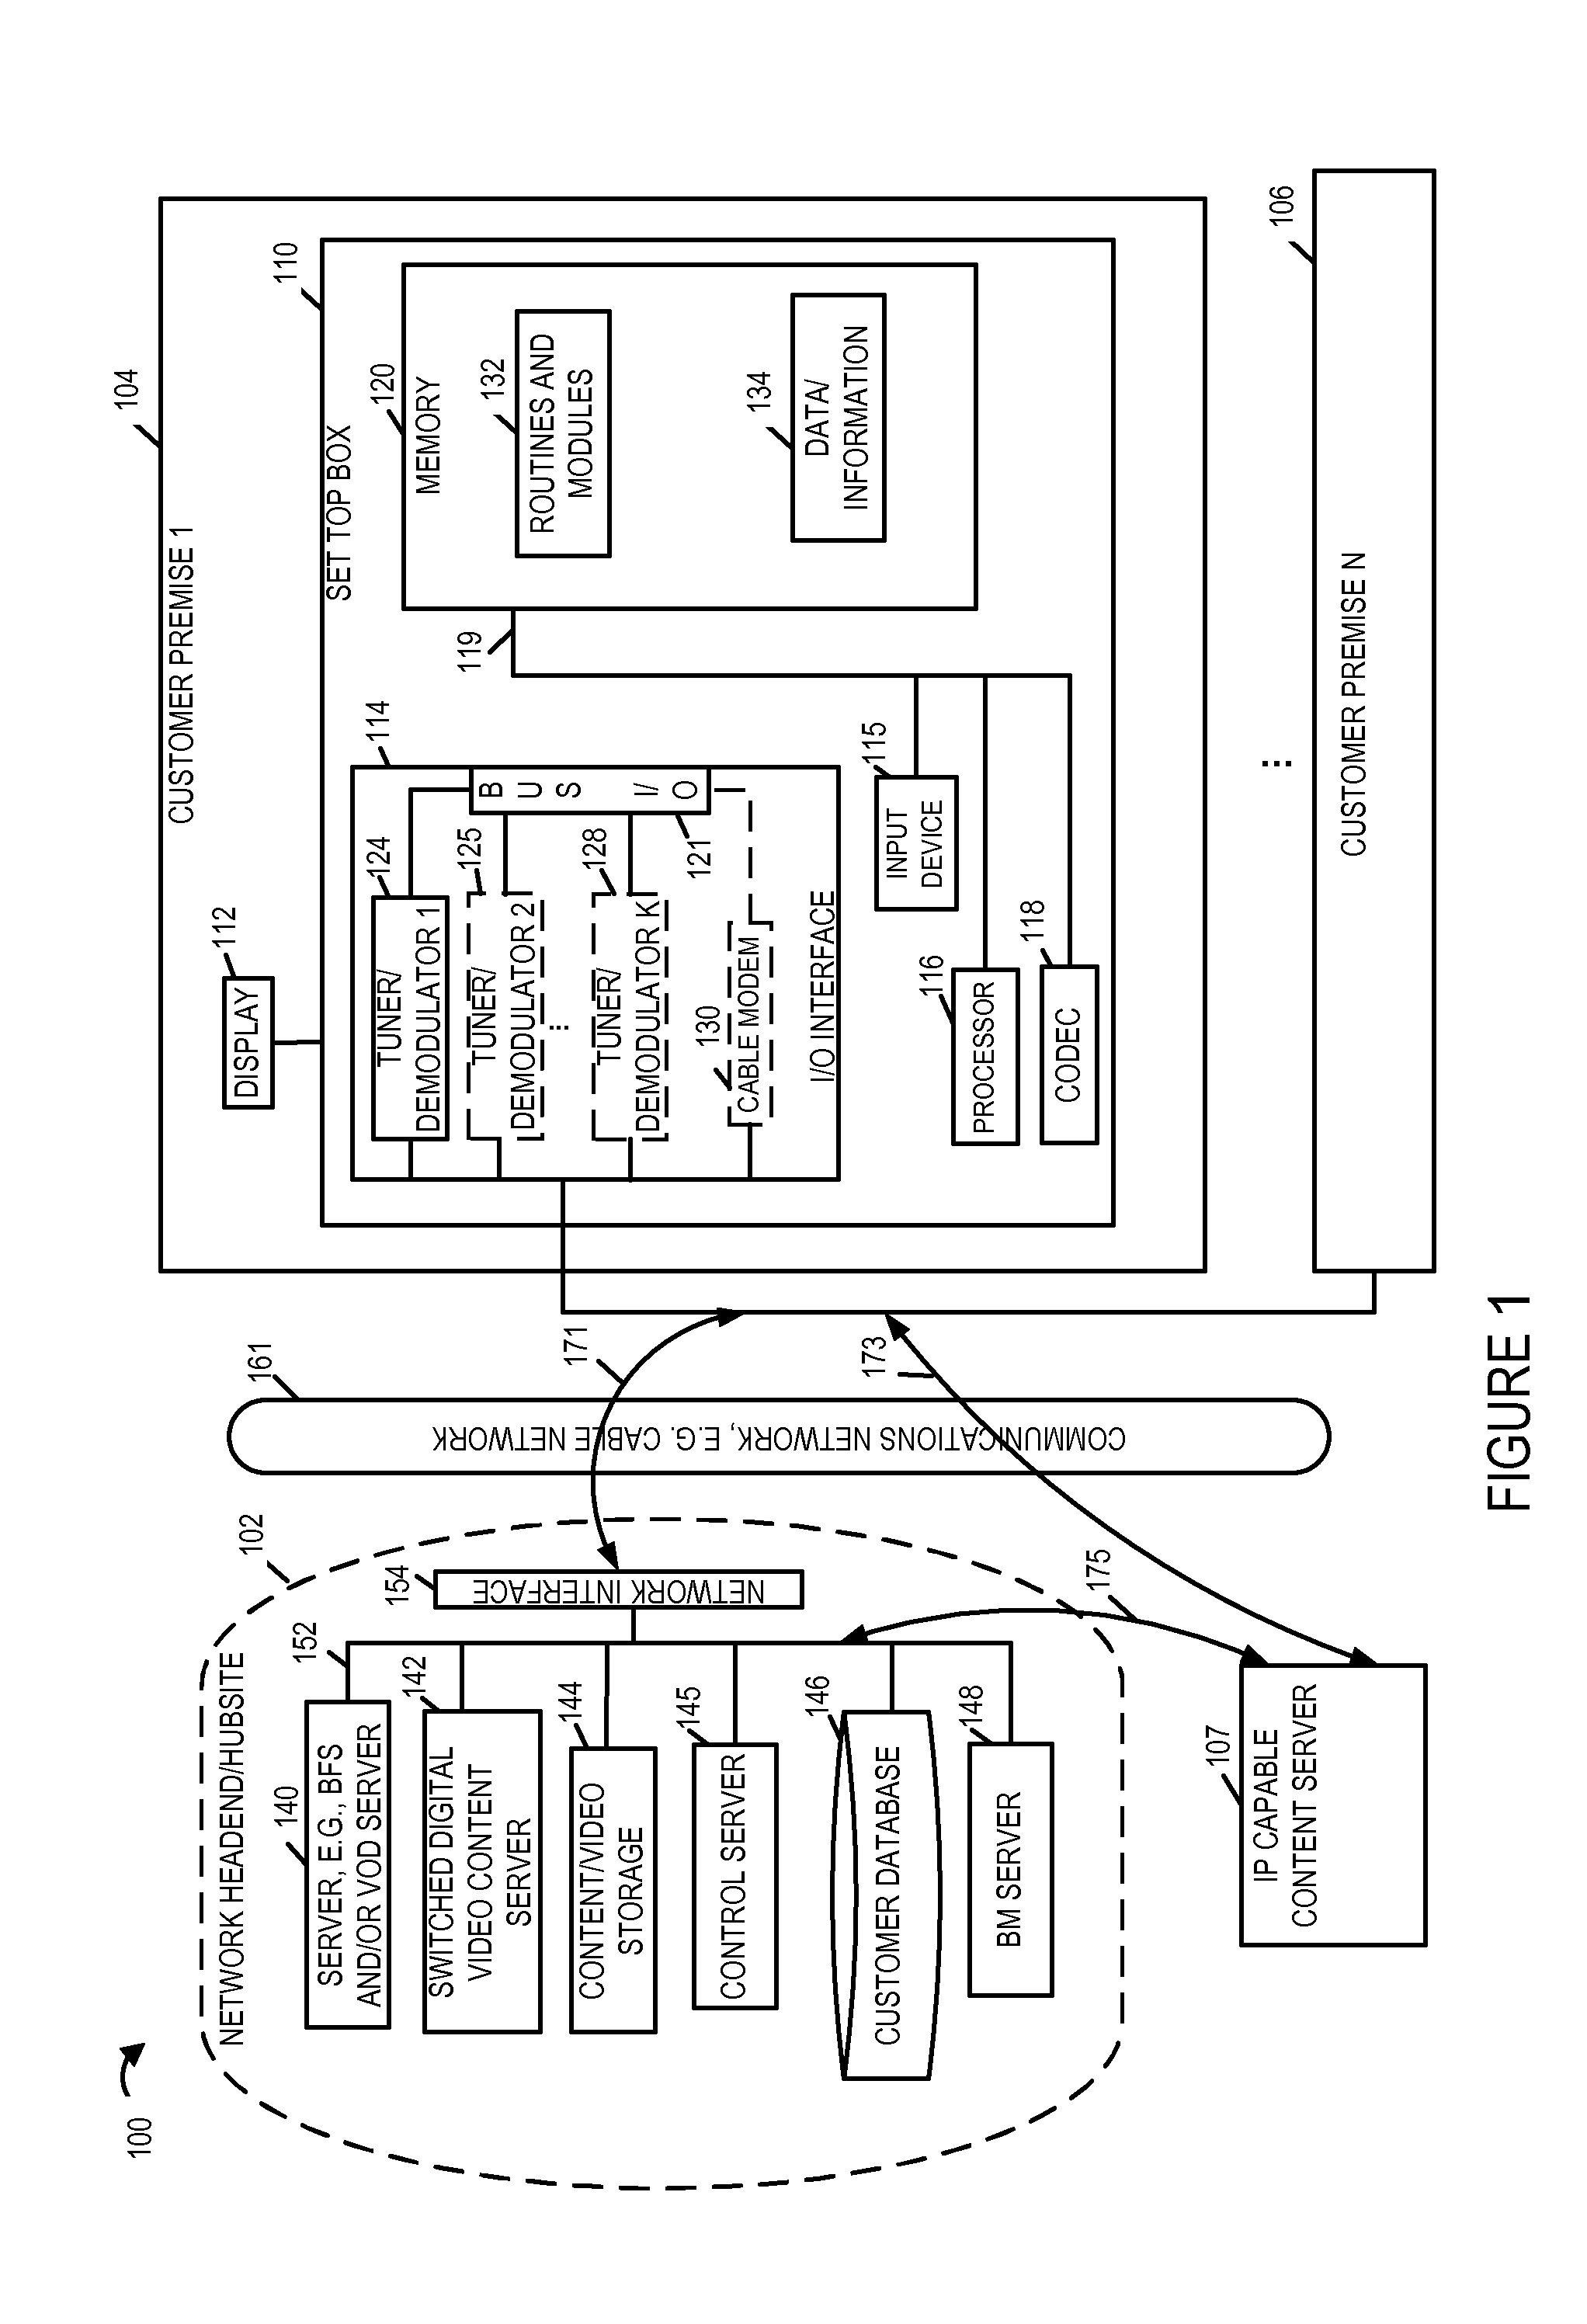 Methods and apparatus that facilitate channel switching during commercial breaks and/or other program segments